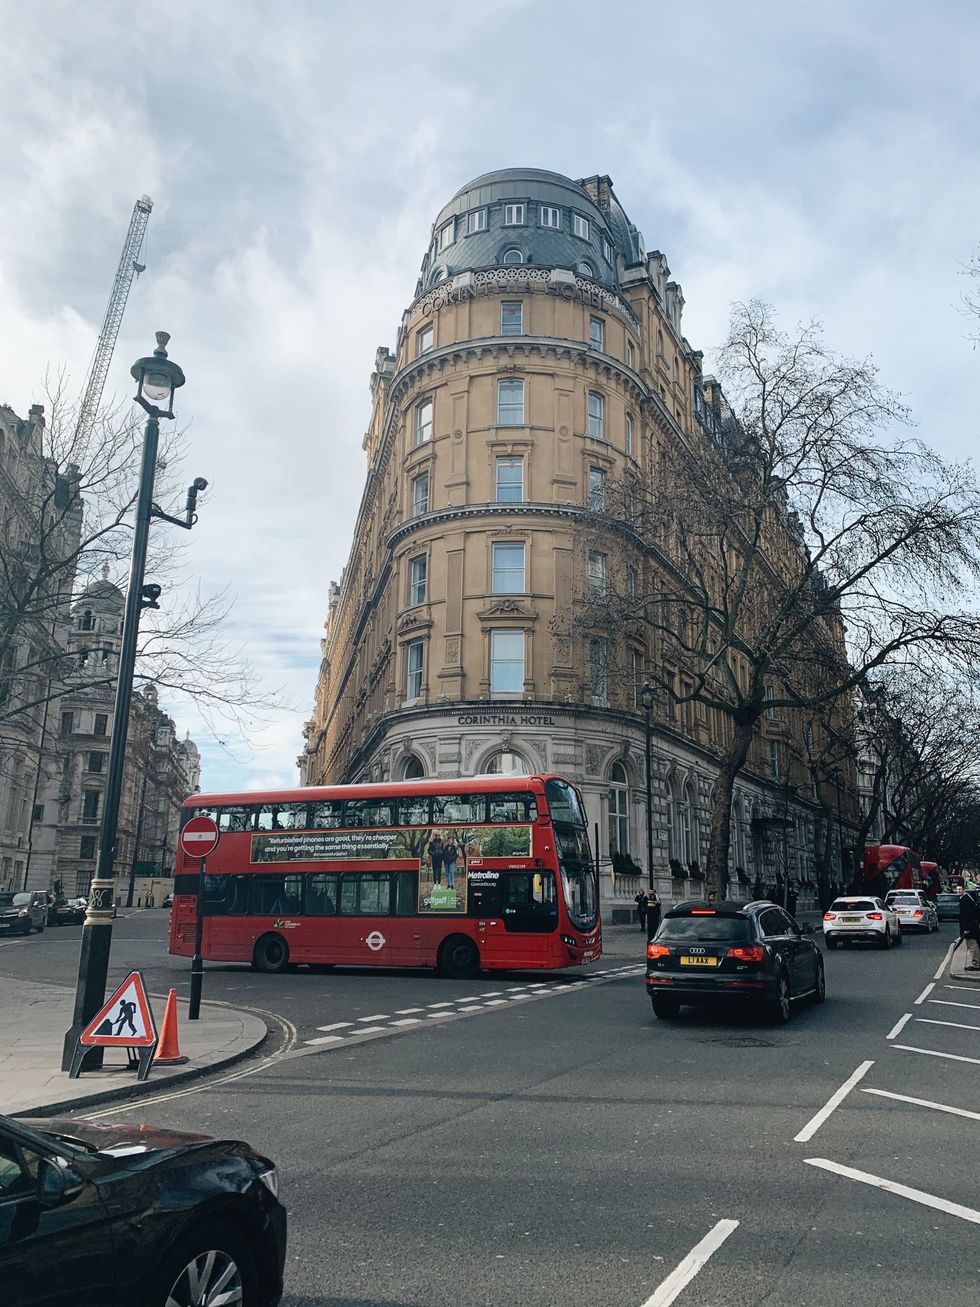 6 Things I Learned In The First 7 Days Studying Abroad In London, Like How Easy It Is To Get Lost